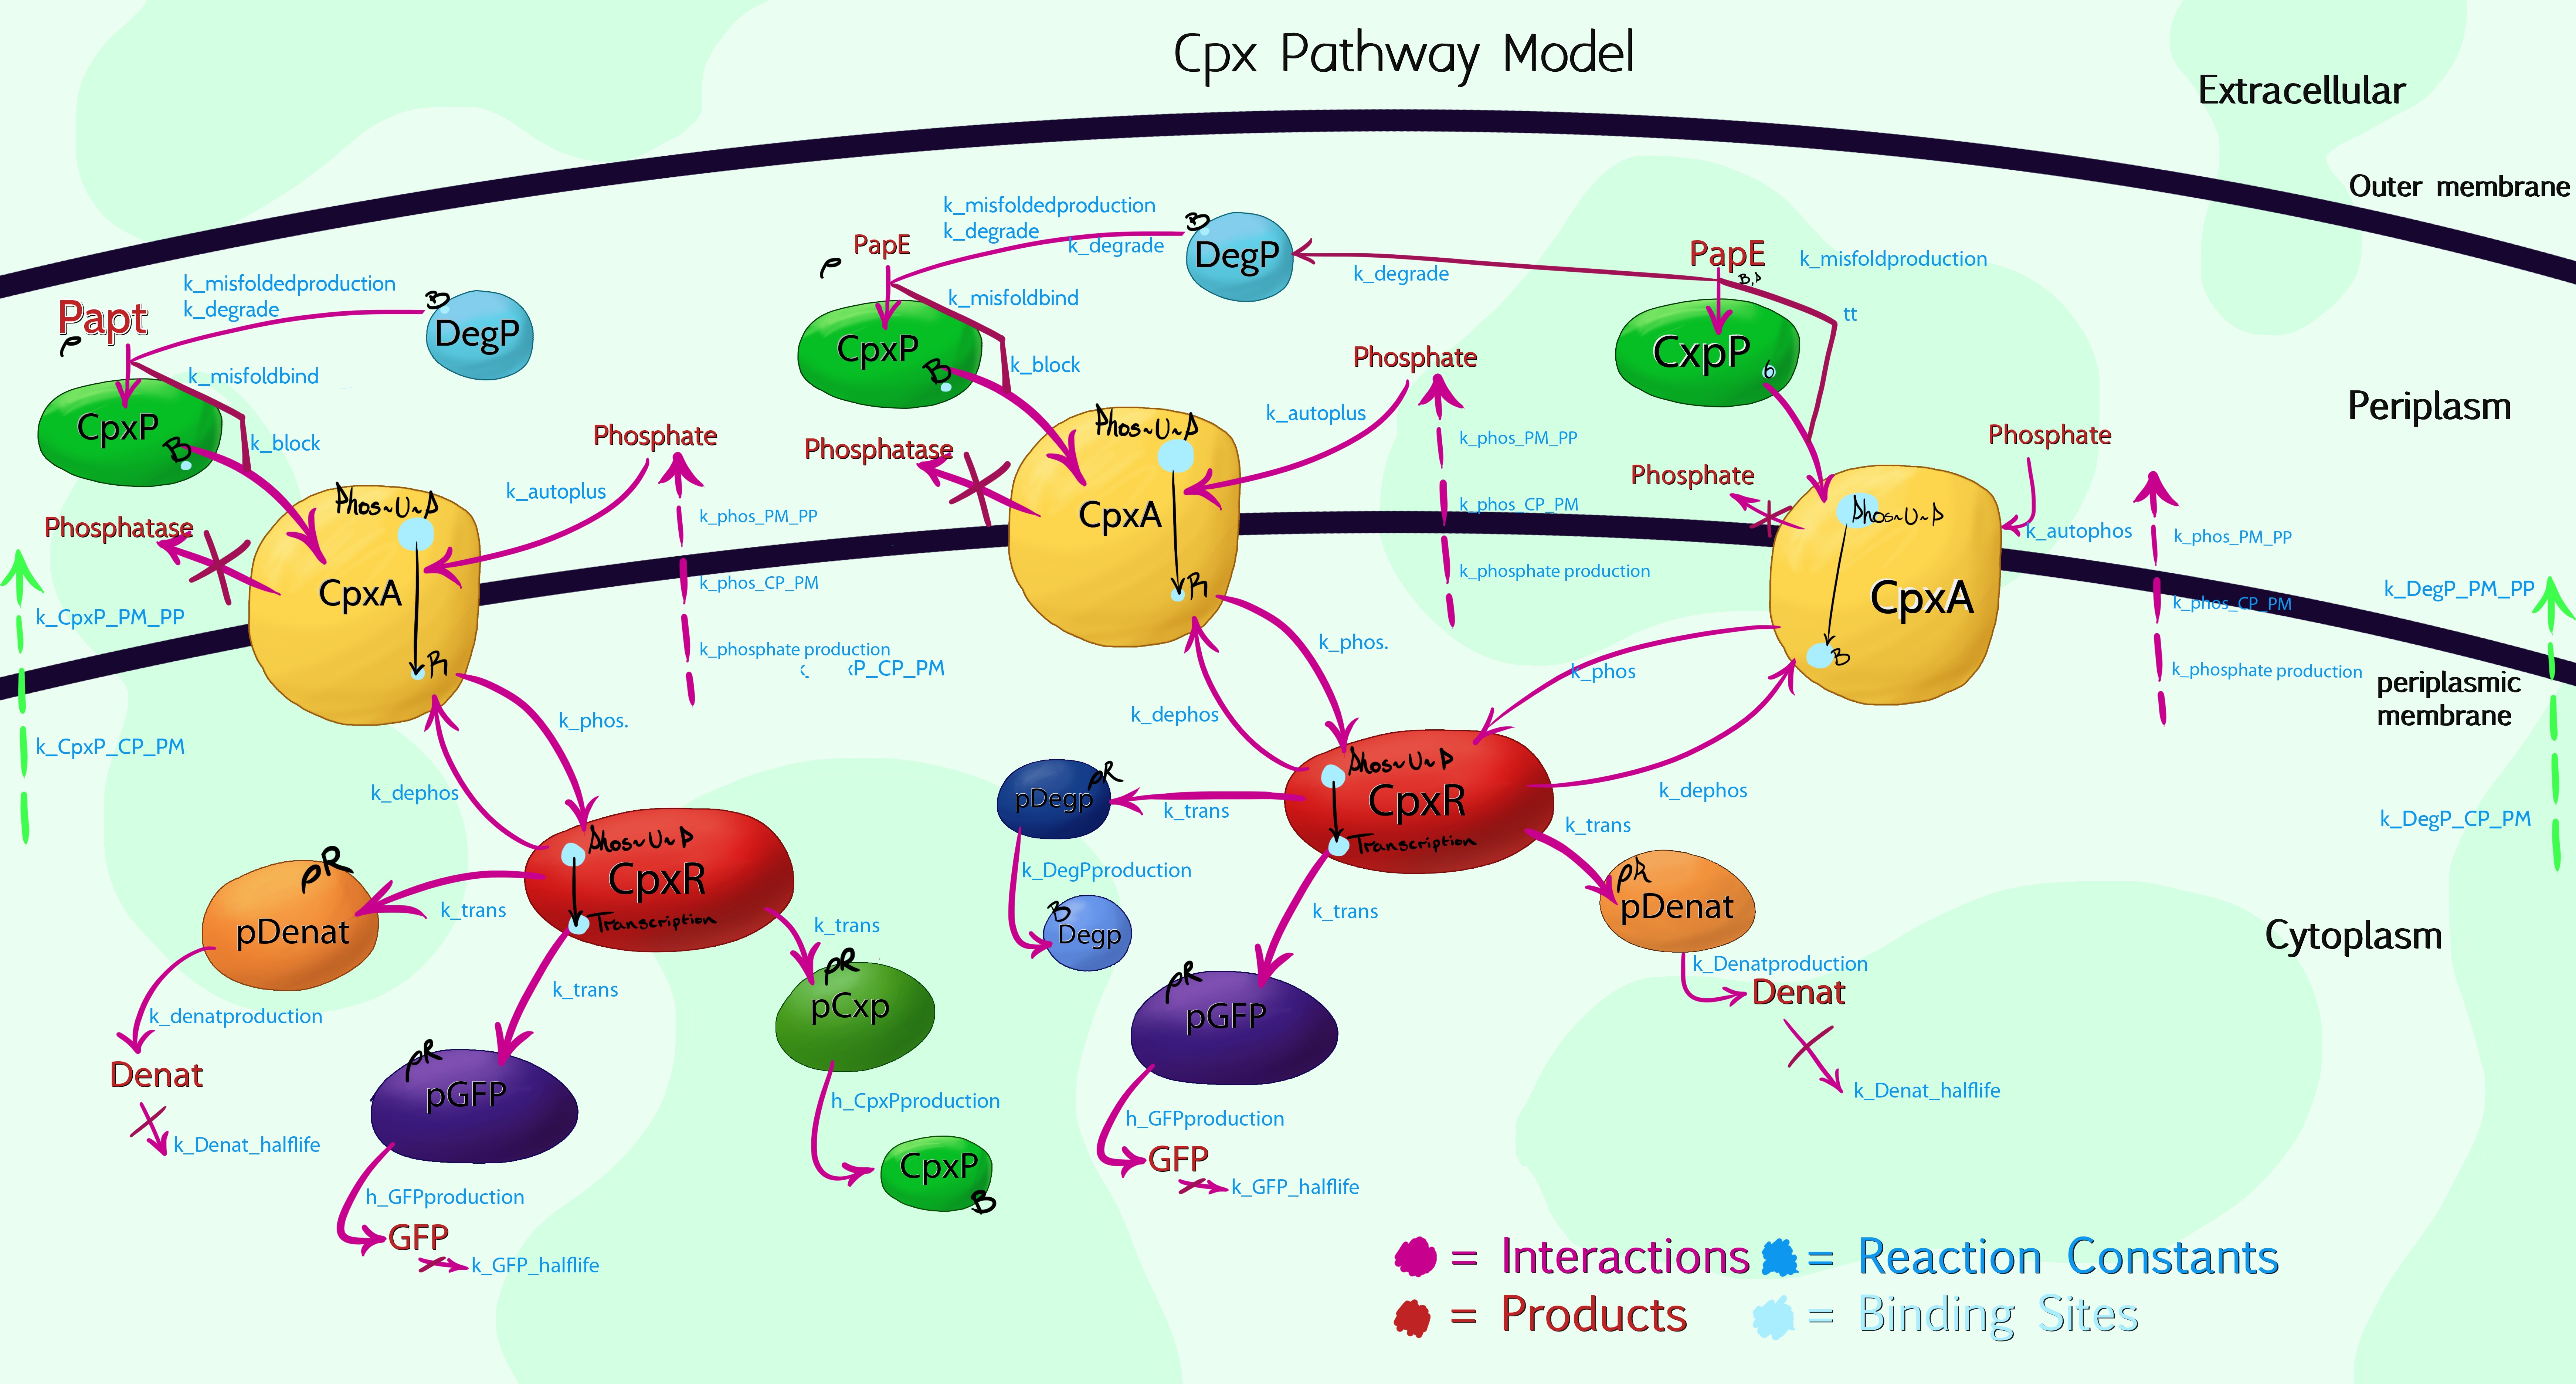 A visual model of the Cpx Pathway, click to enlarge